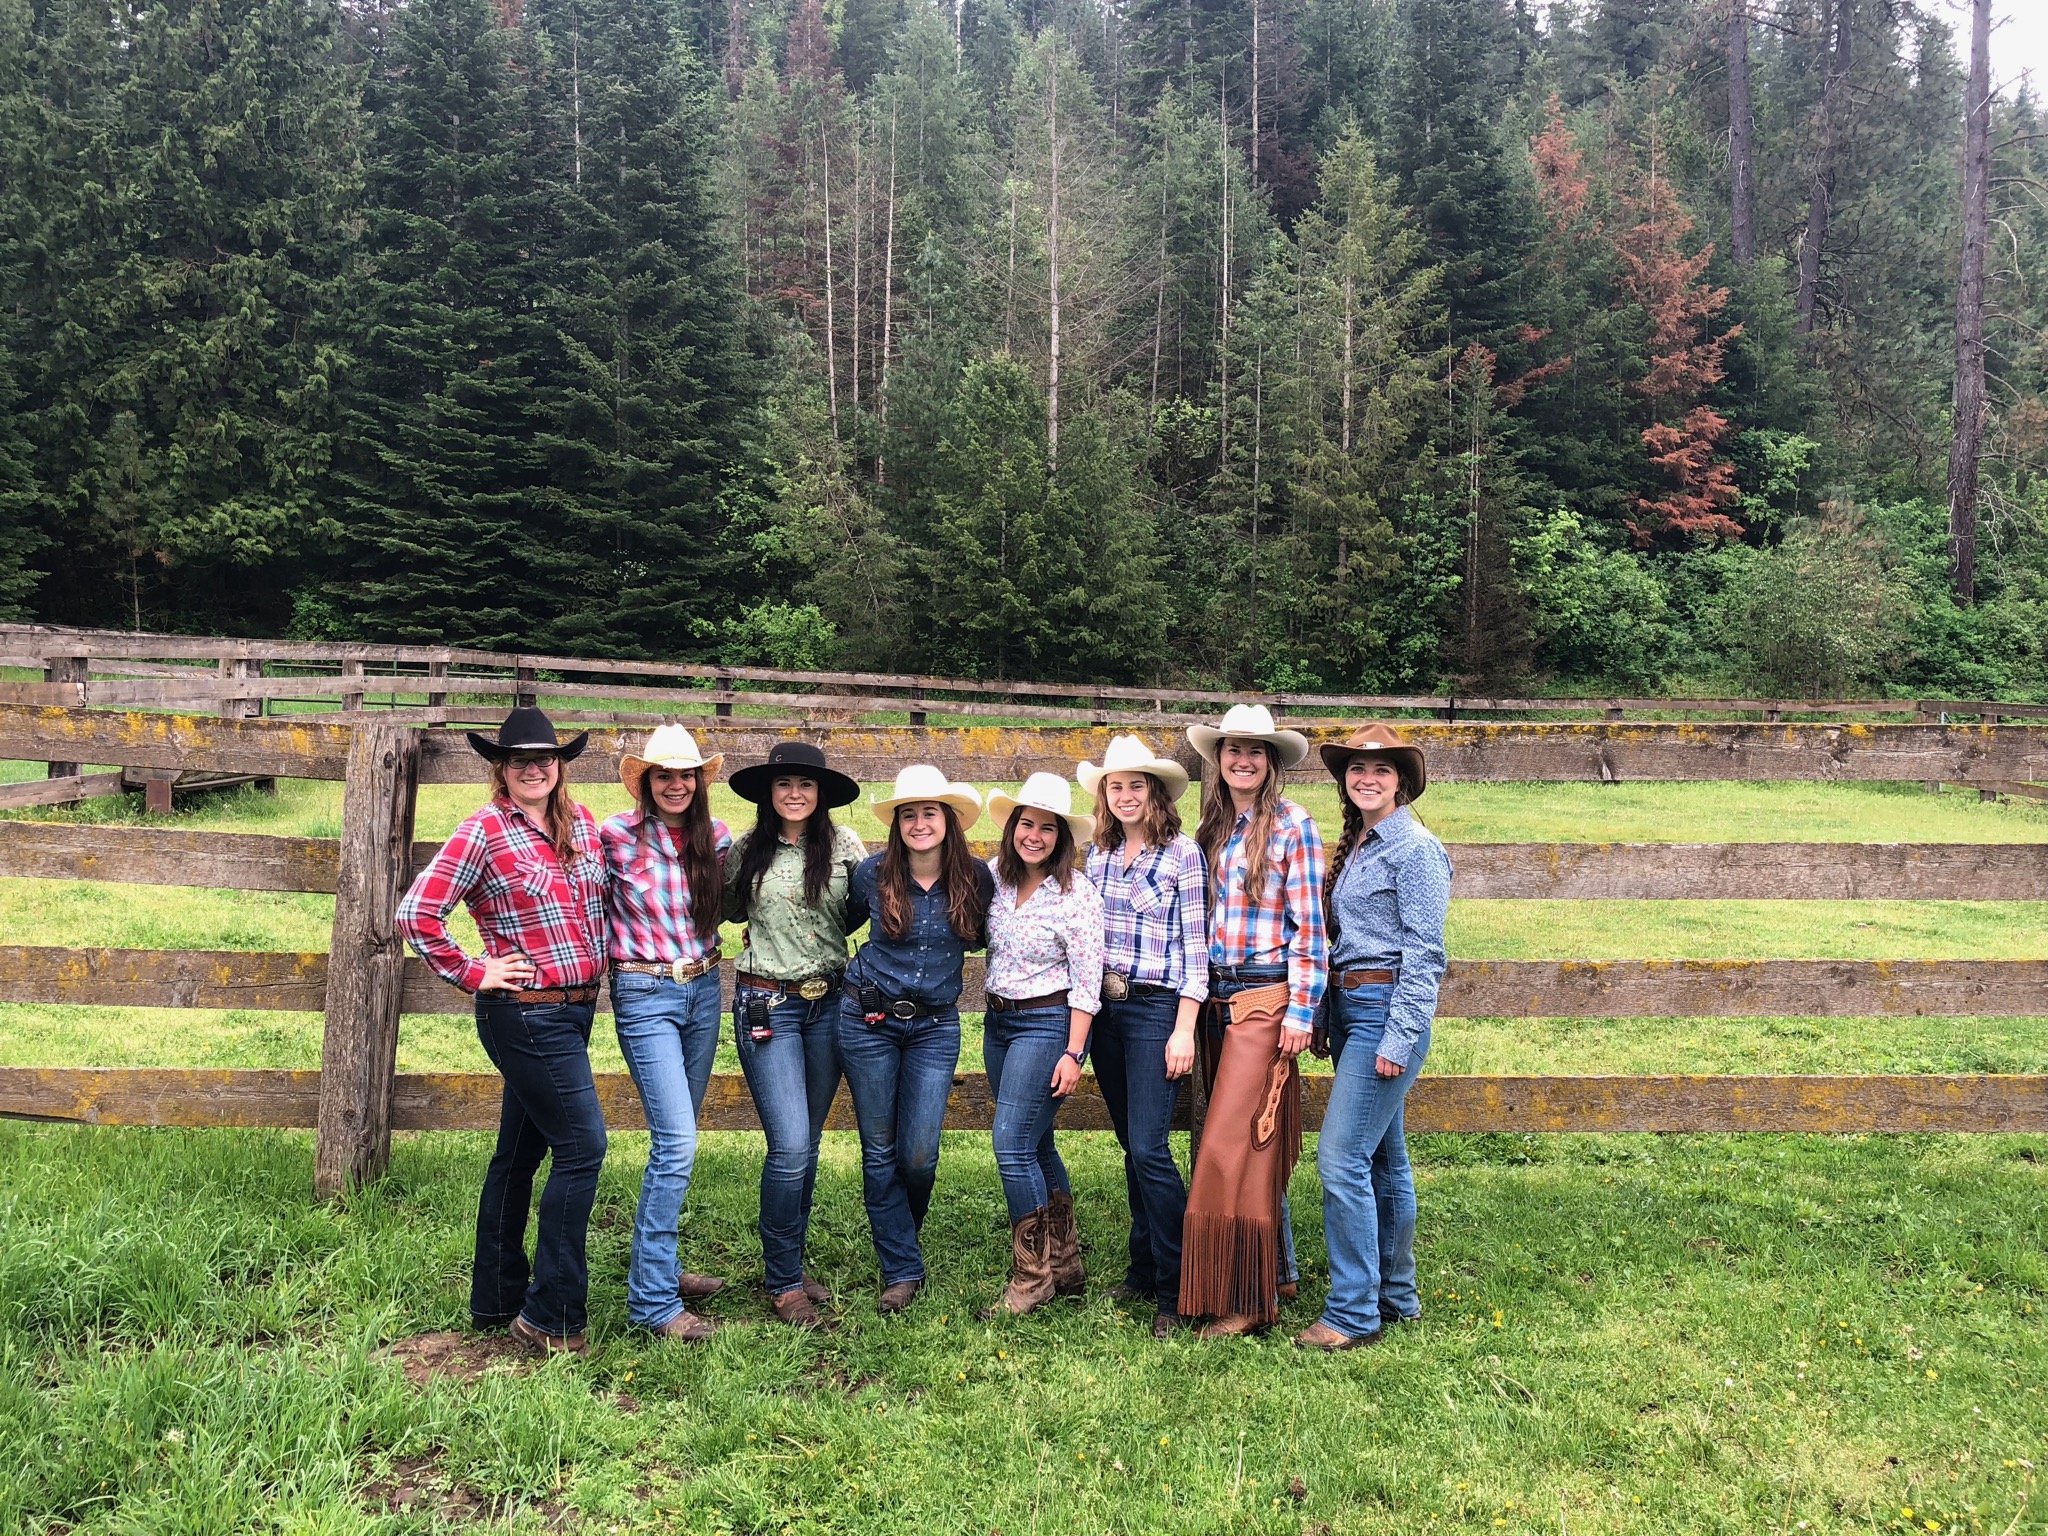 Group of women posing at the ranch.